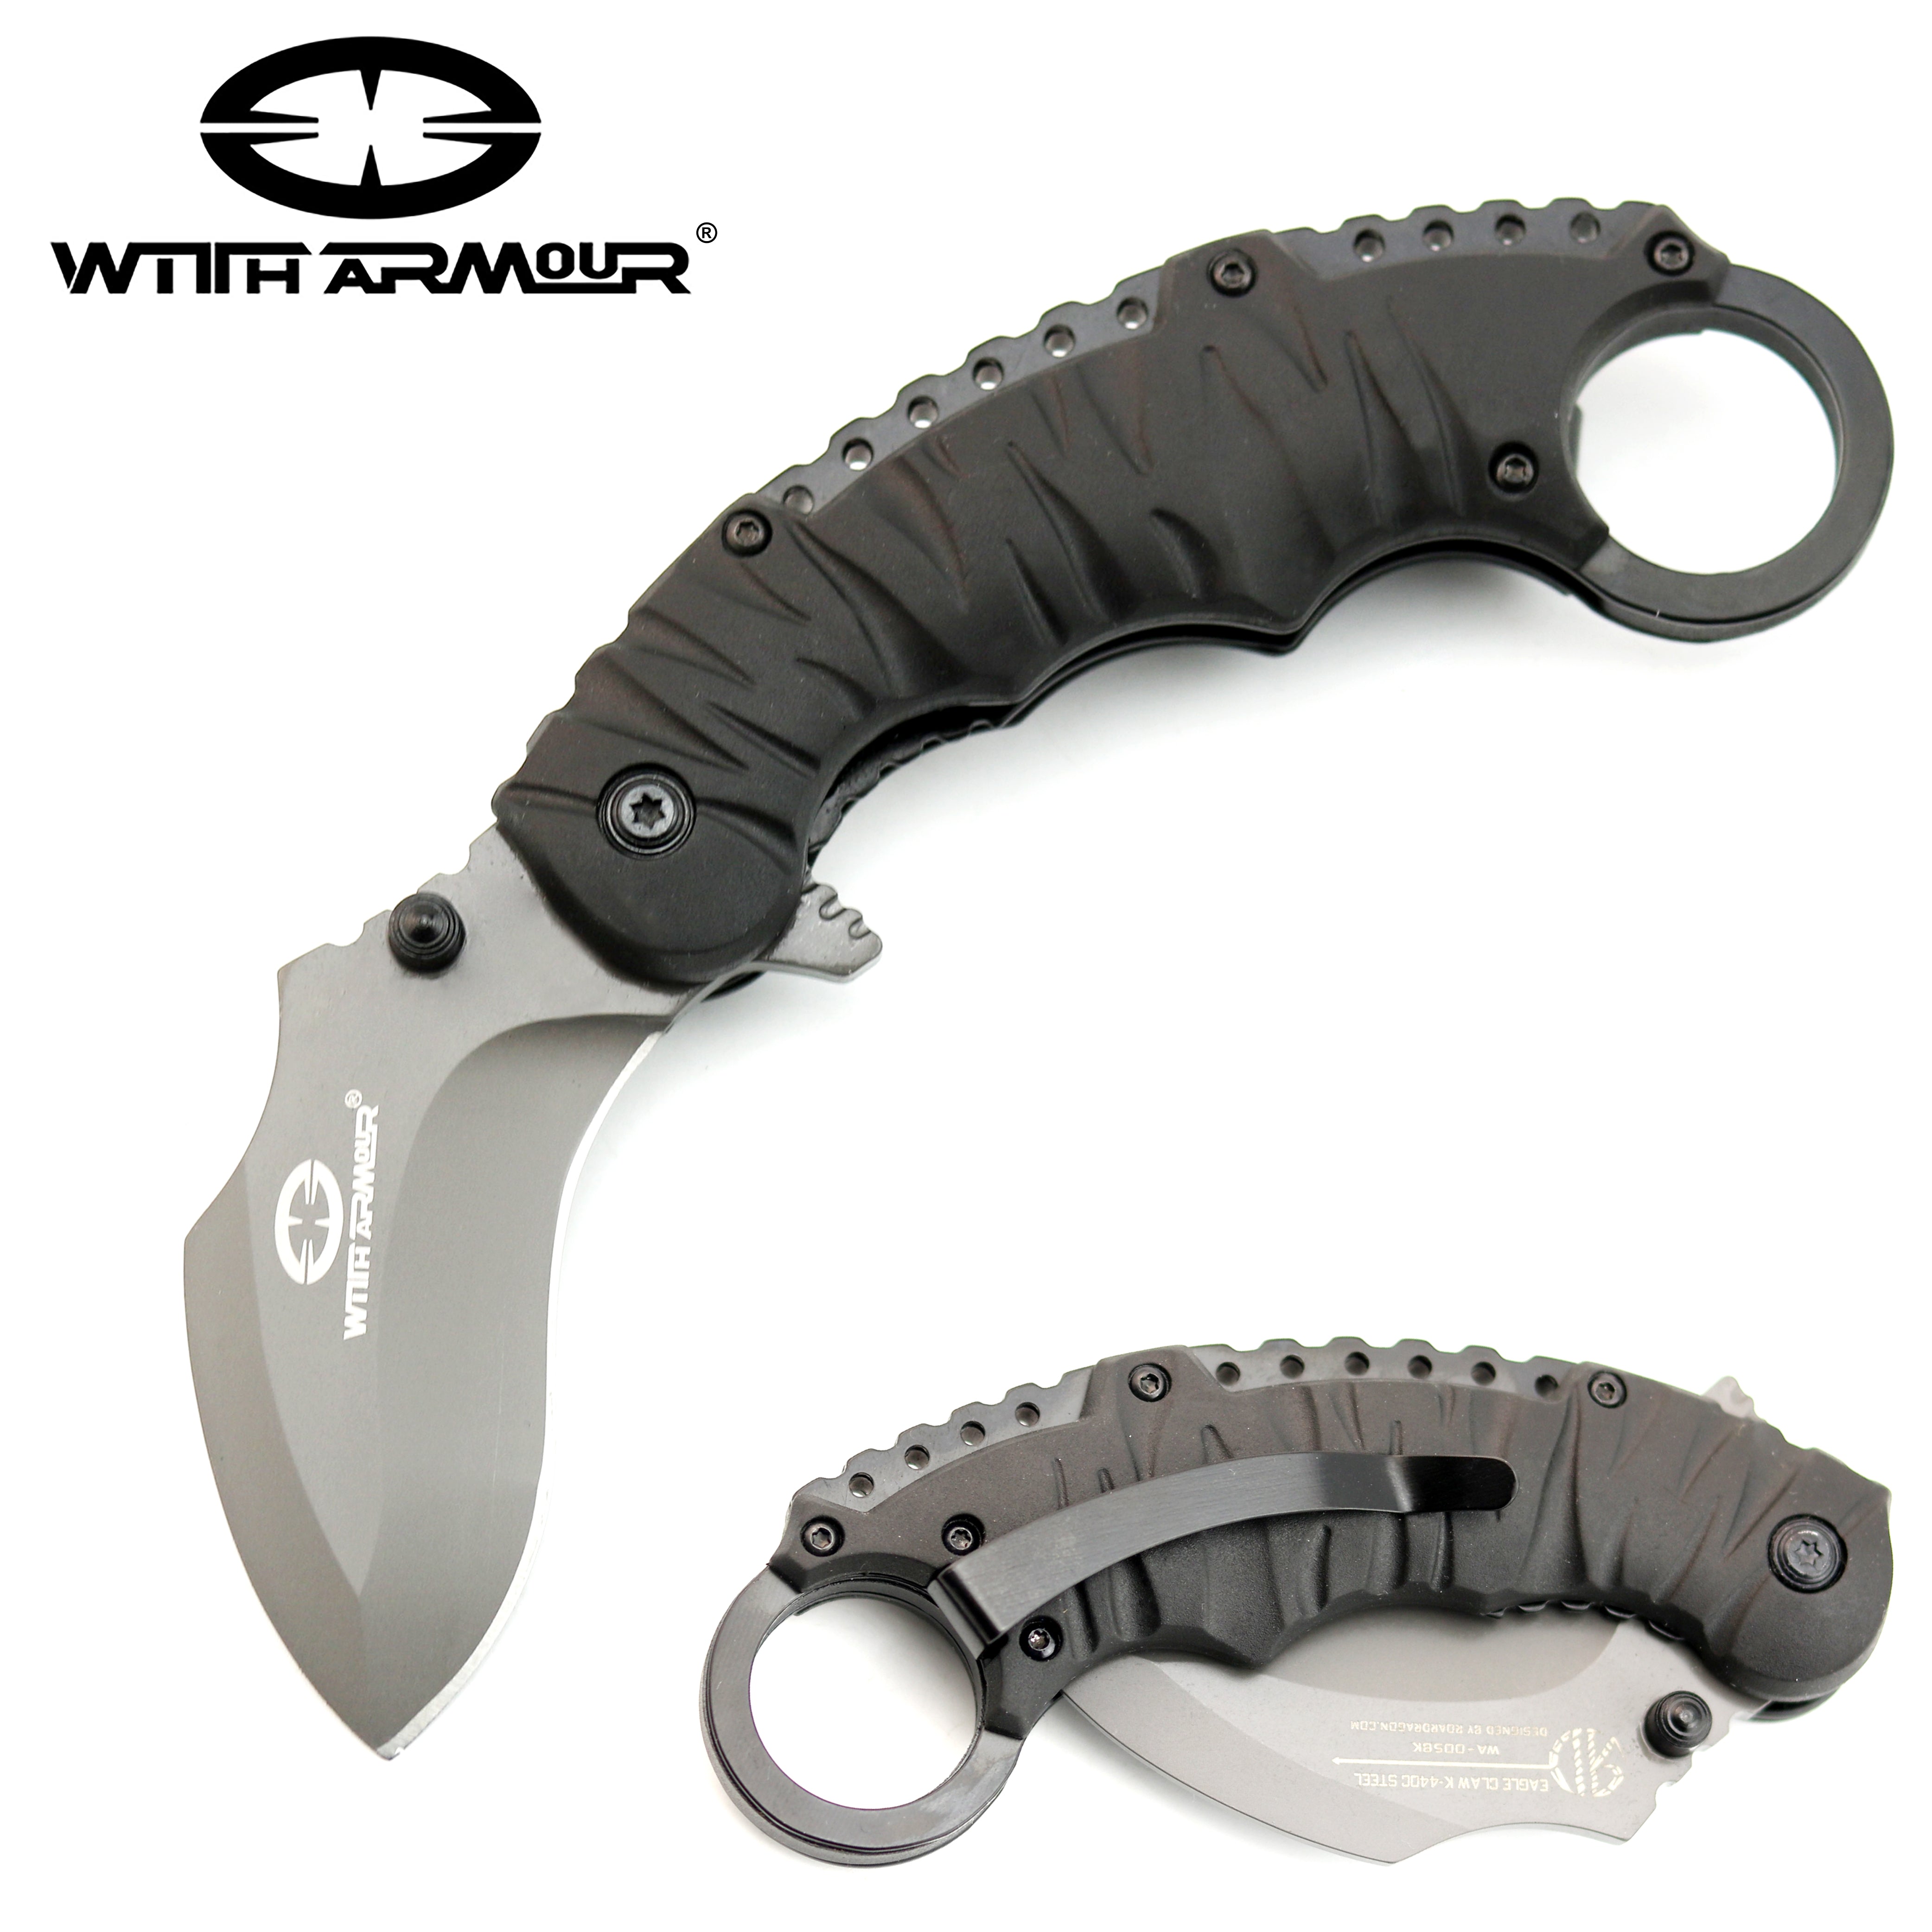 WithArmour Knife Thor (WA-085GY) 5 inch pocket knife – Witharmour